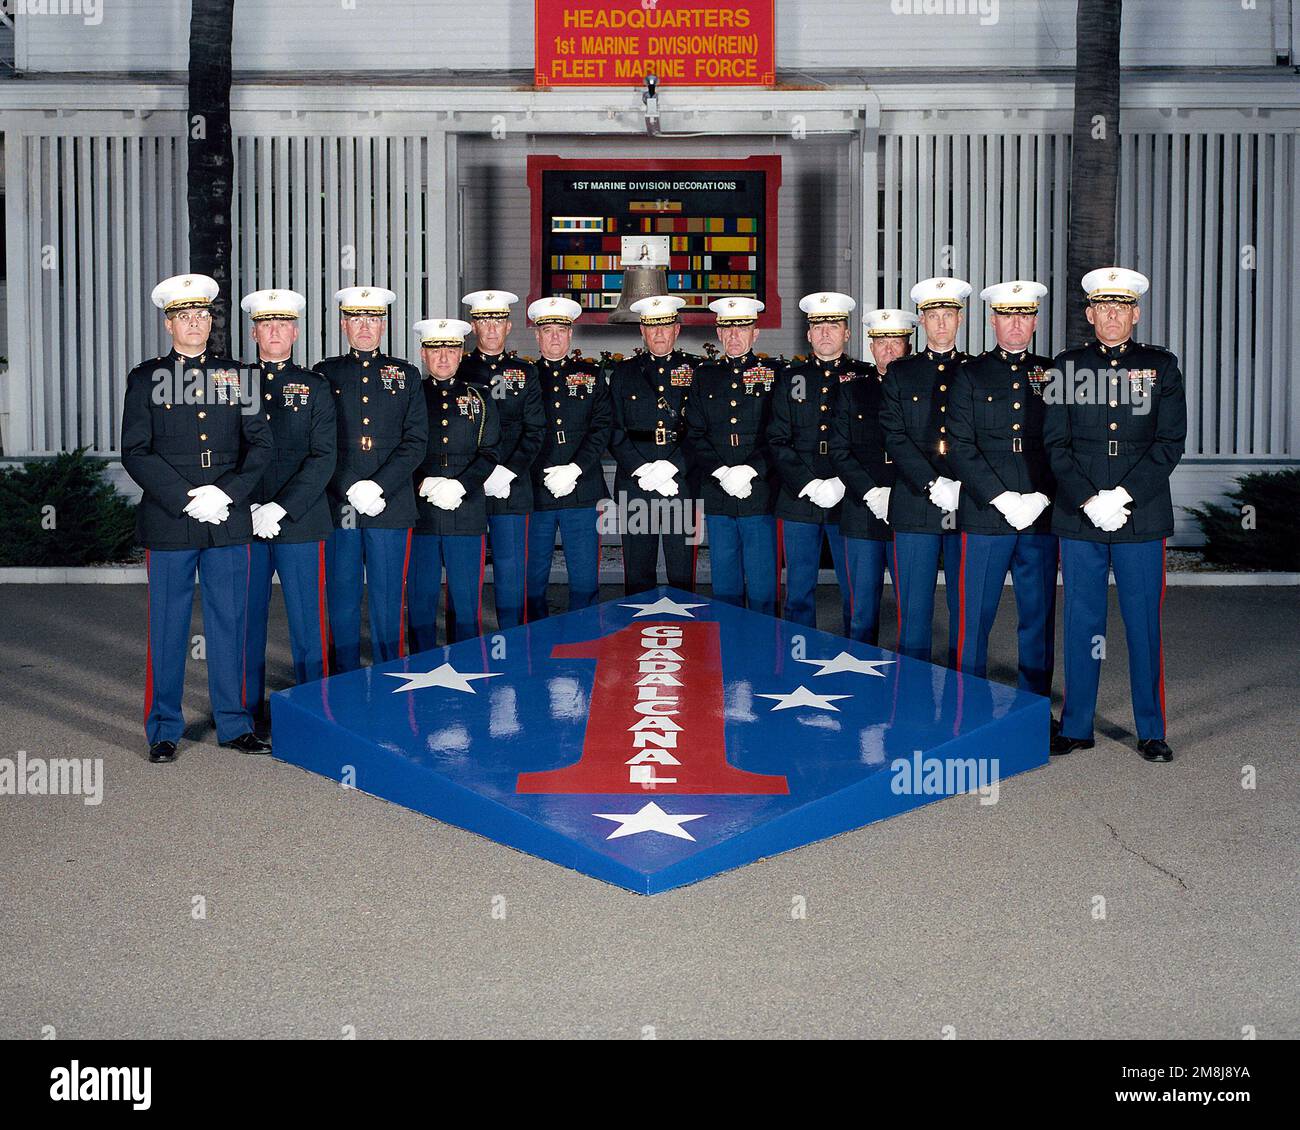 Exterior, MLS, MG Charles E. Wilhelm, USMC, Commanding General 1ST Marine Division and 12 Regimental Commanders, in dress blues, line up on two sides of a large replica of the 1ST Marine Division Patch and Seal. In background behind the staff is a sign, 'HEADQUARTERS 1ST MARINE DIVISION (REIN) FLEET MARINE FORCE'. Behind the staff is a large plaque showing the 1ST marine Division's Decorations and a ship's bell. The bell is from the USS WHARTON (AP-7) a WW II Troop Transport. The ship was named for the third Commandant of the Marine Corps, LTC Frank Wharton. Base: Marine Corps Base Camp Pendle Stock Photo